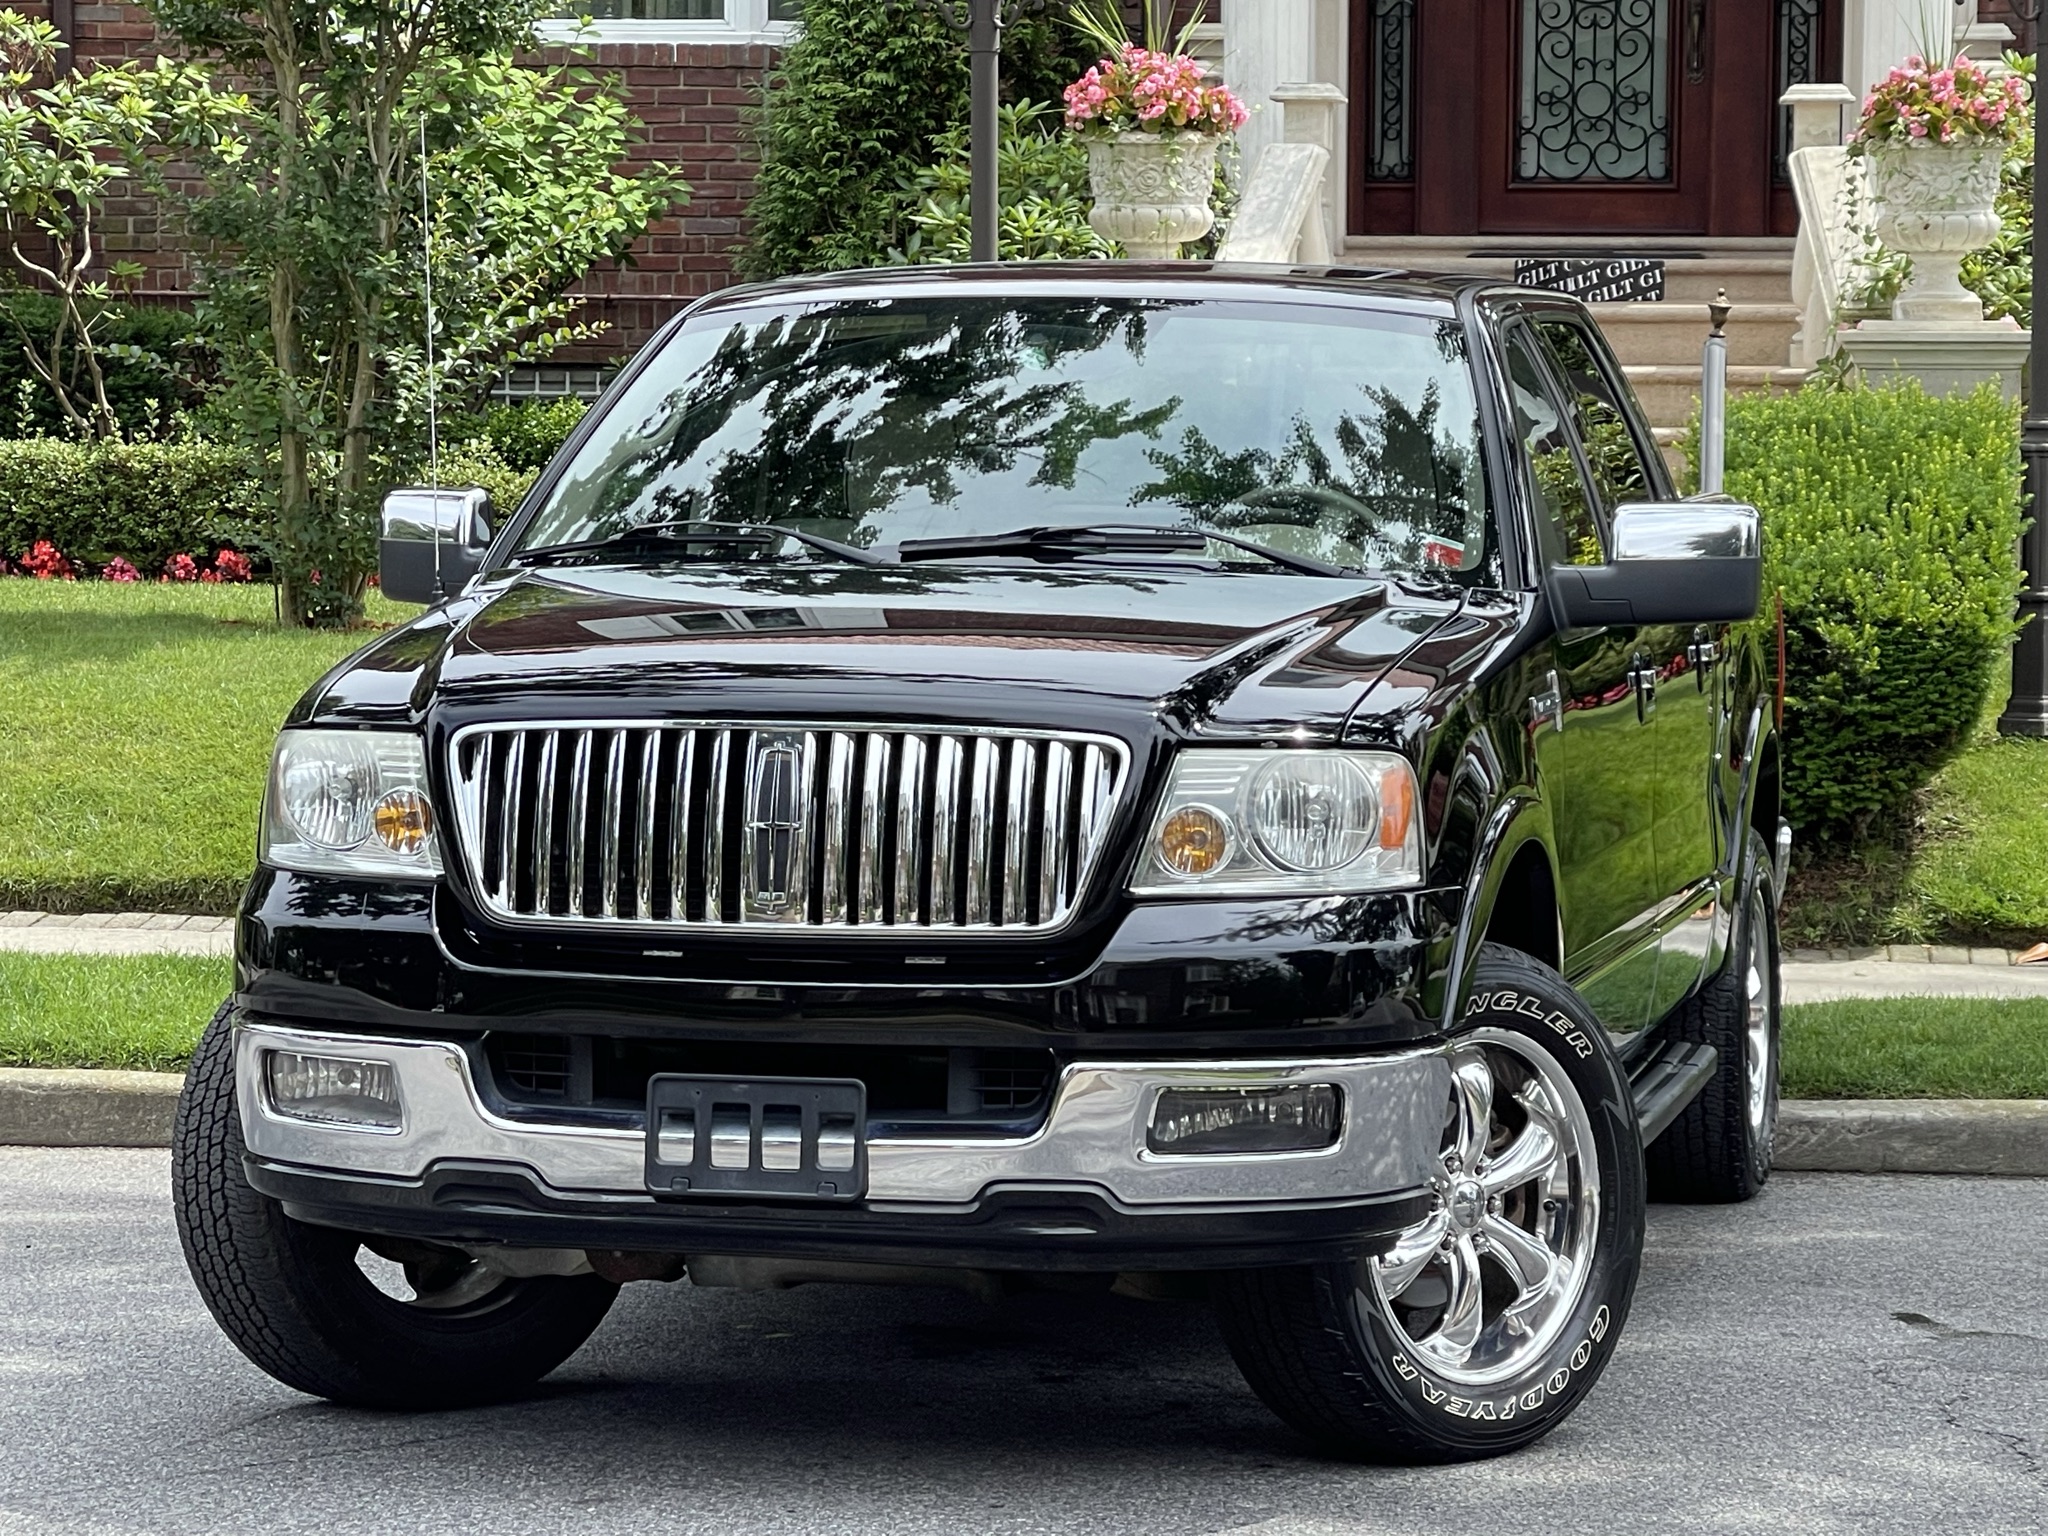 Buy Used 2006 LINCOLN MARK LT CREW CAB for $16 900 from trusted dealer in  Brooklyn, NY!